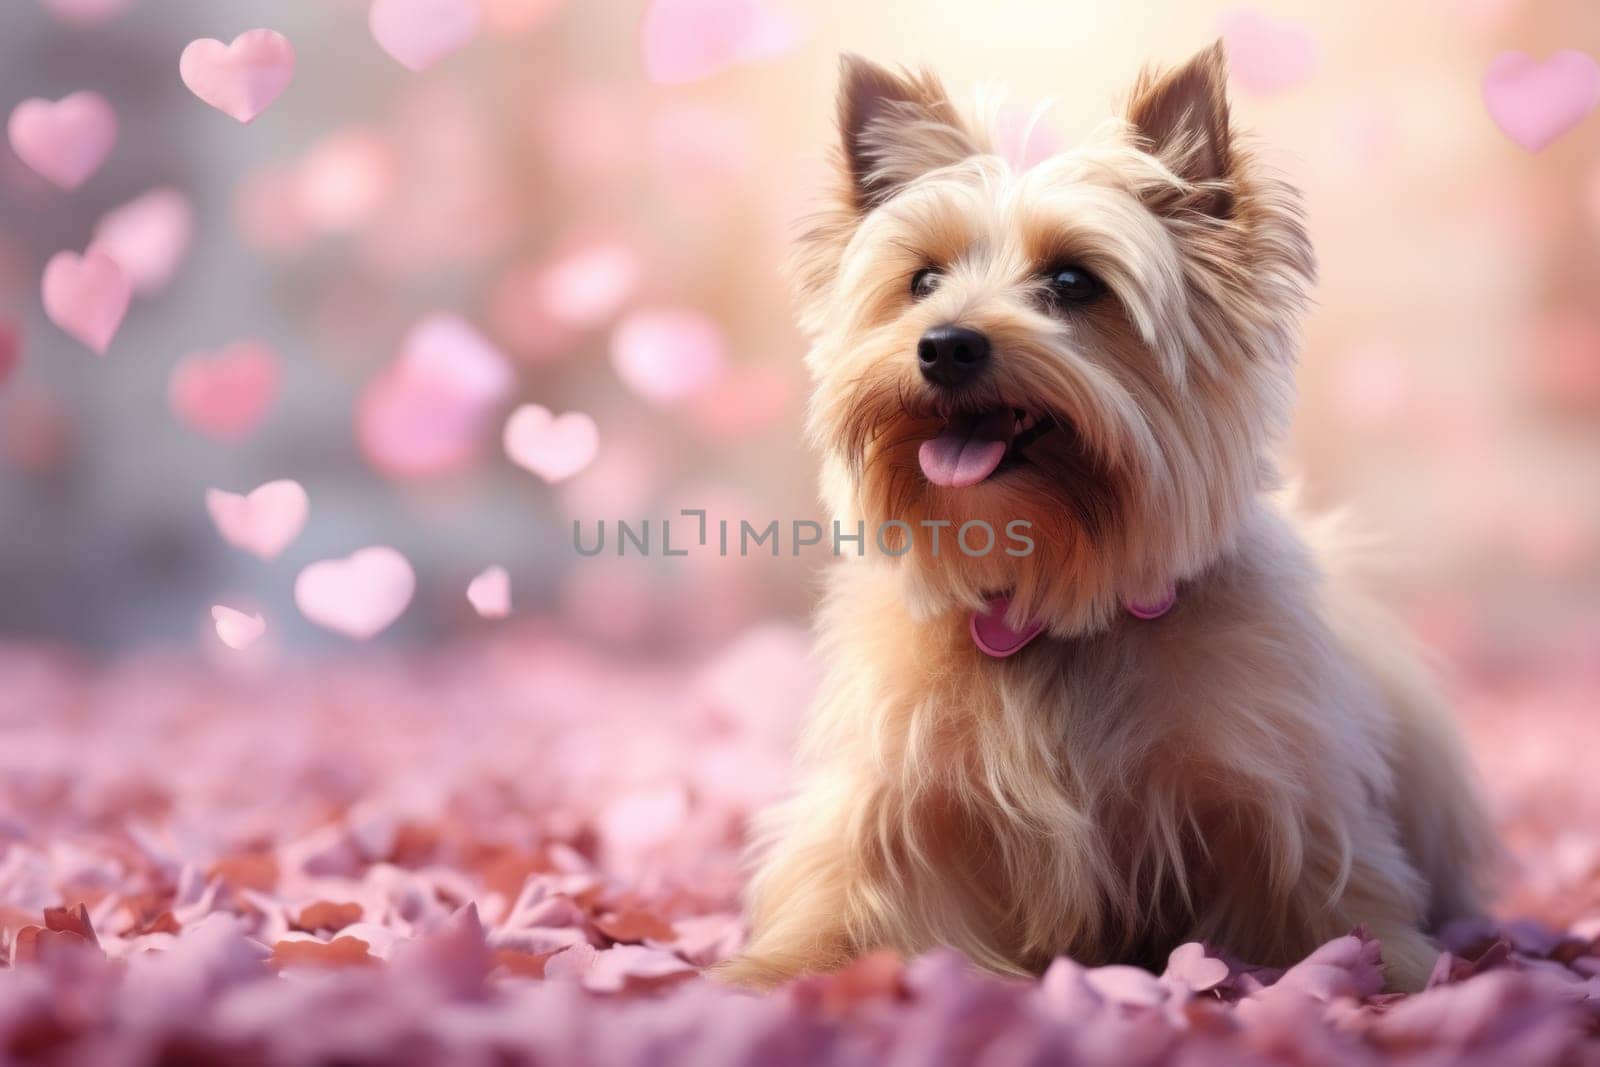 A small dog sitting on a bed of pink flowers